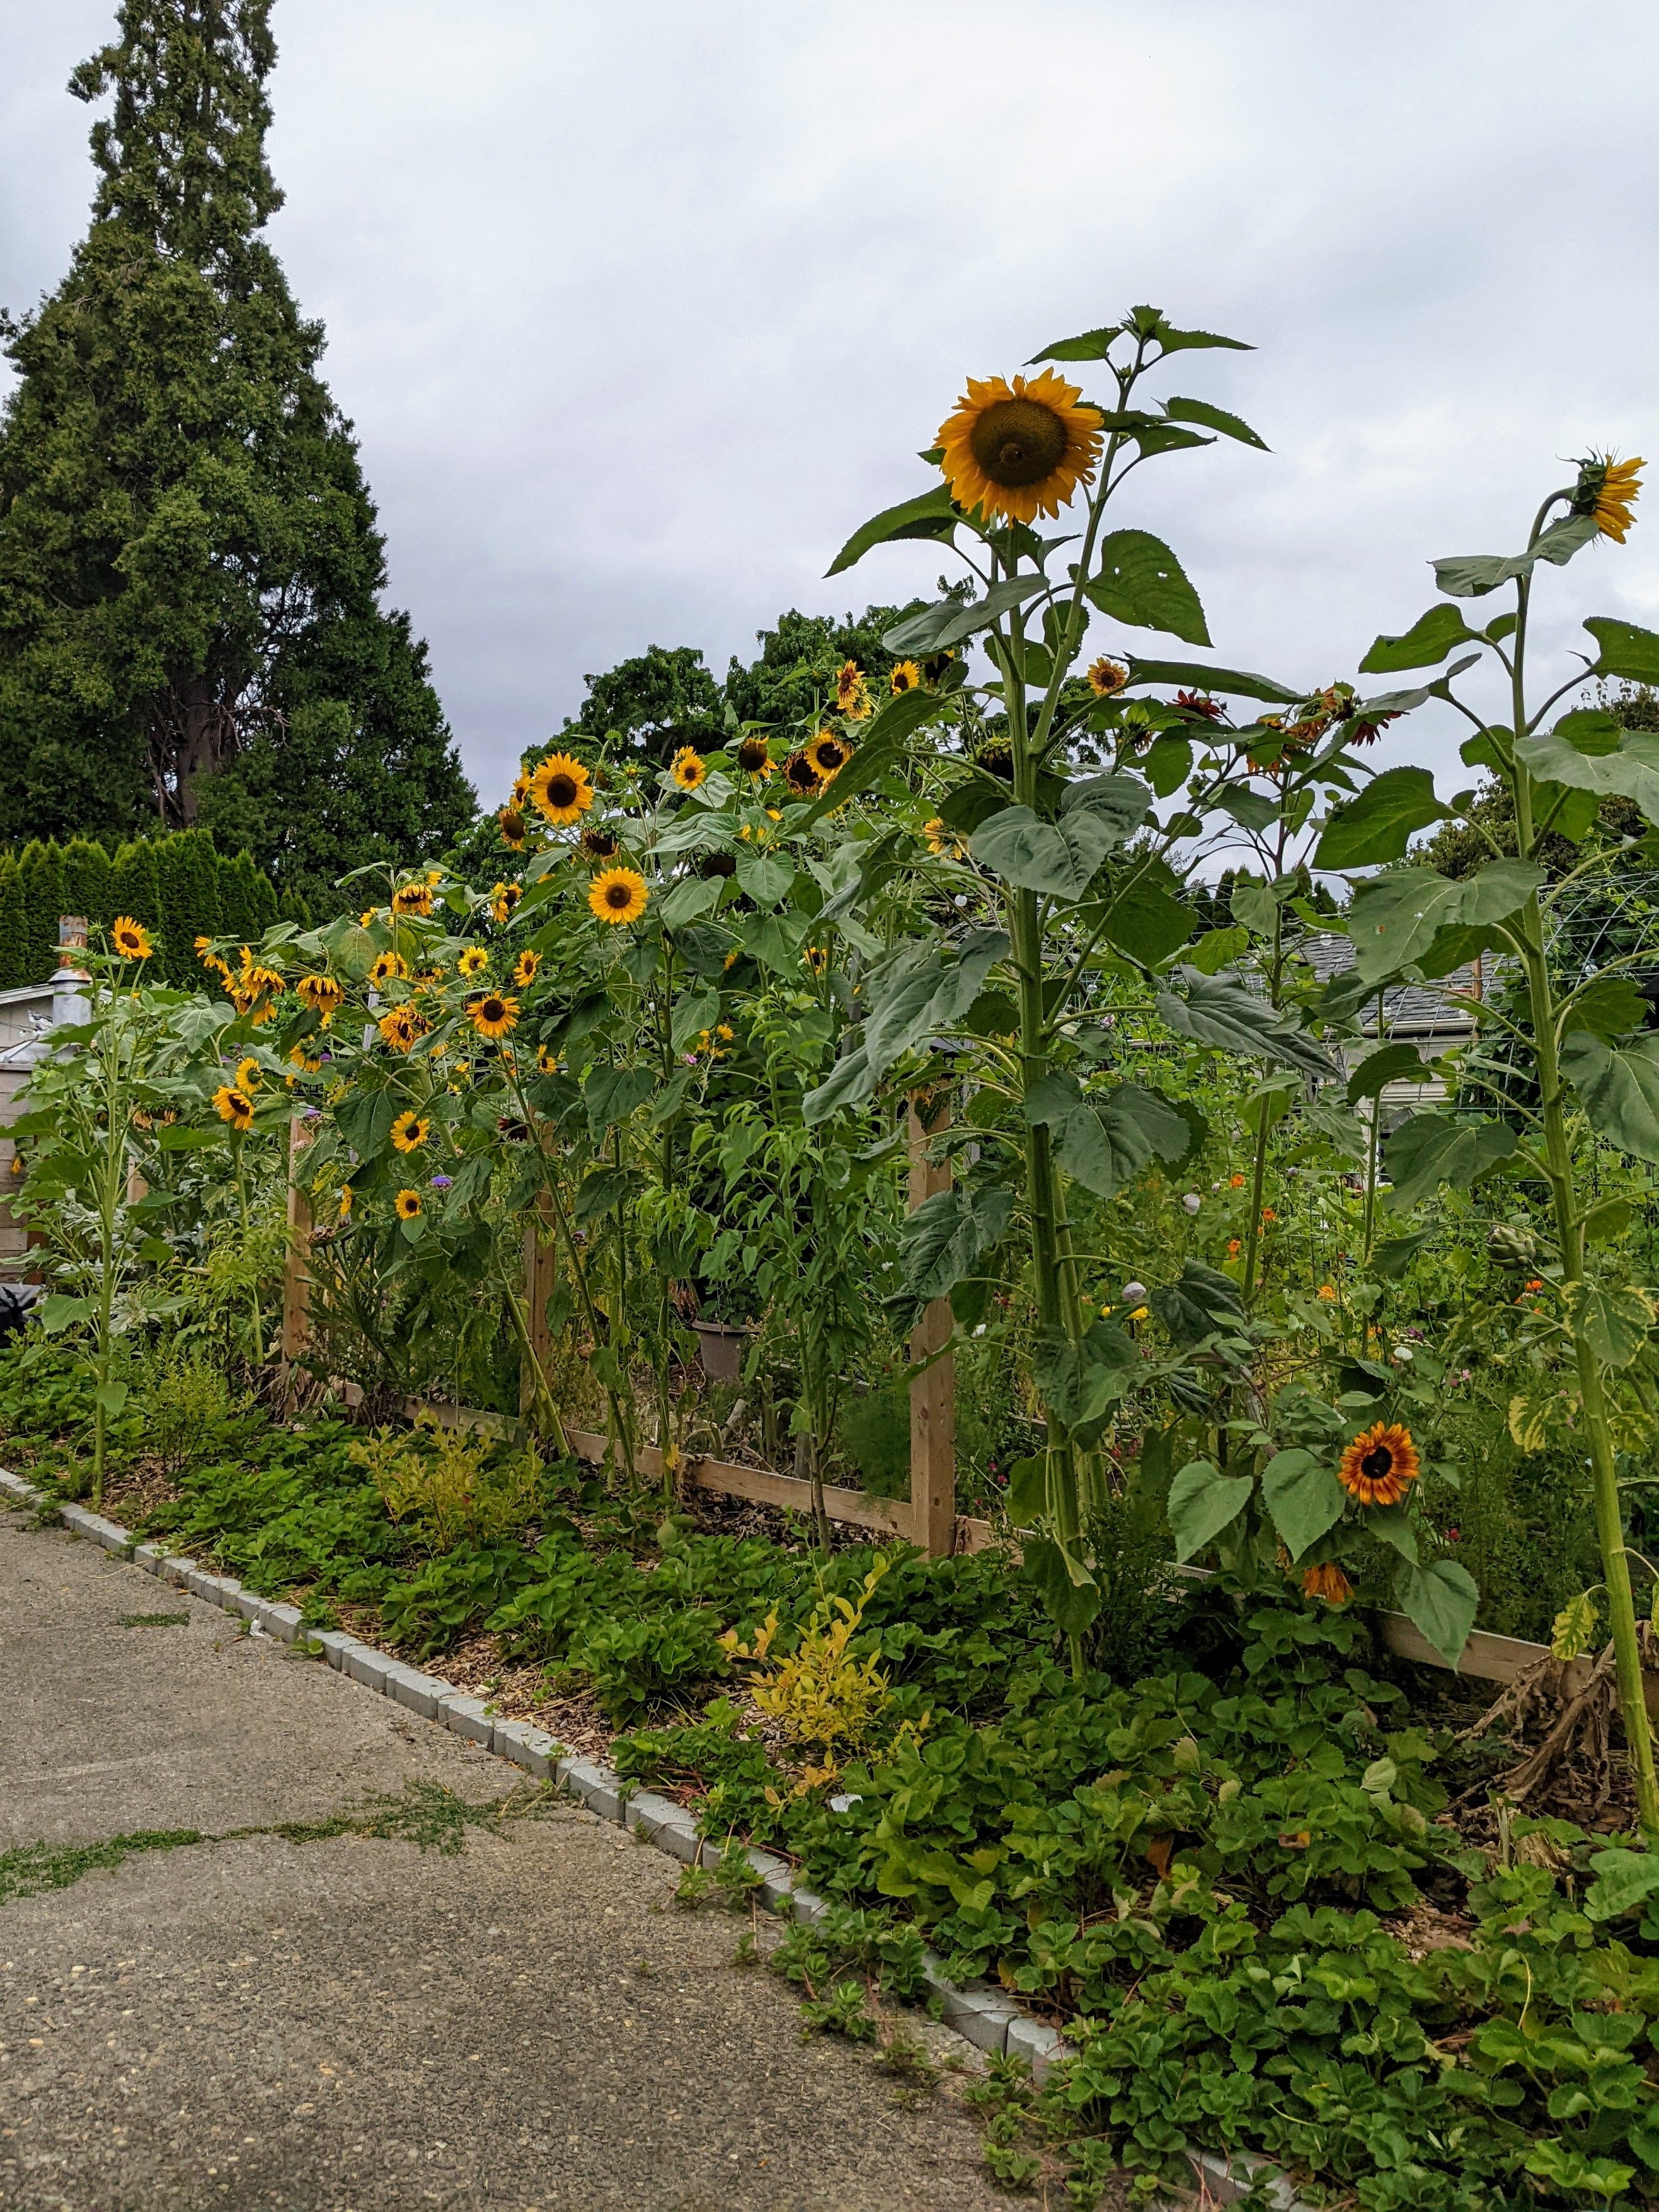 The back of my flower wall from my neighbours view. The 4.57 m sunflowers tower over everything.  (Photo: Amanda Blum)